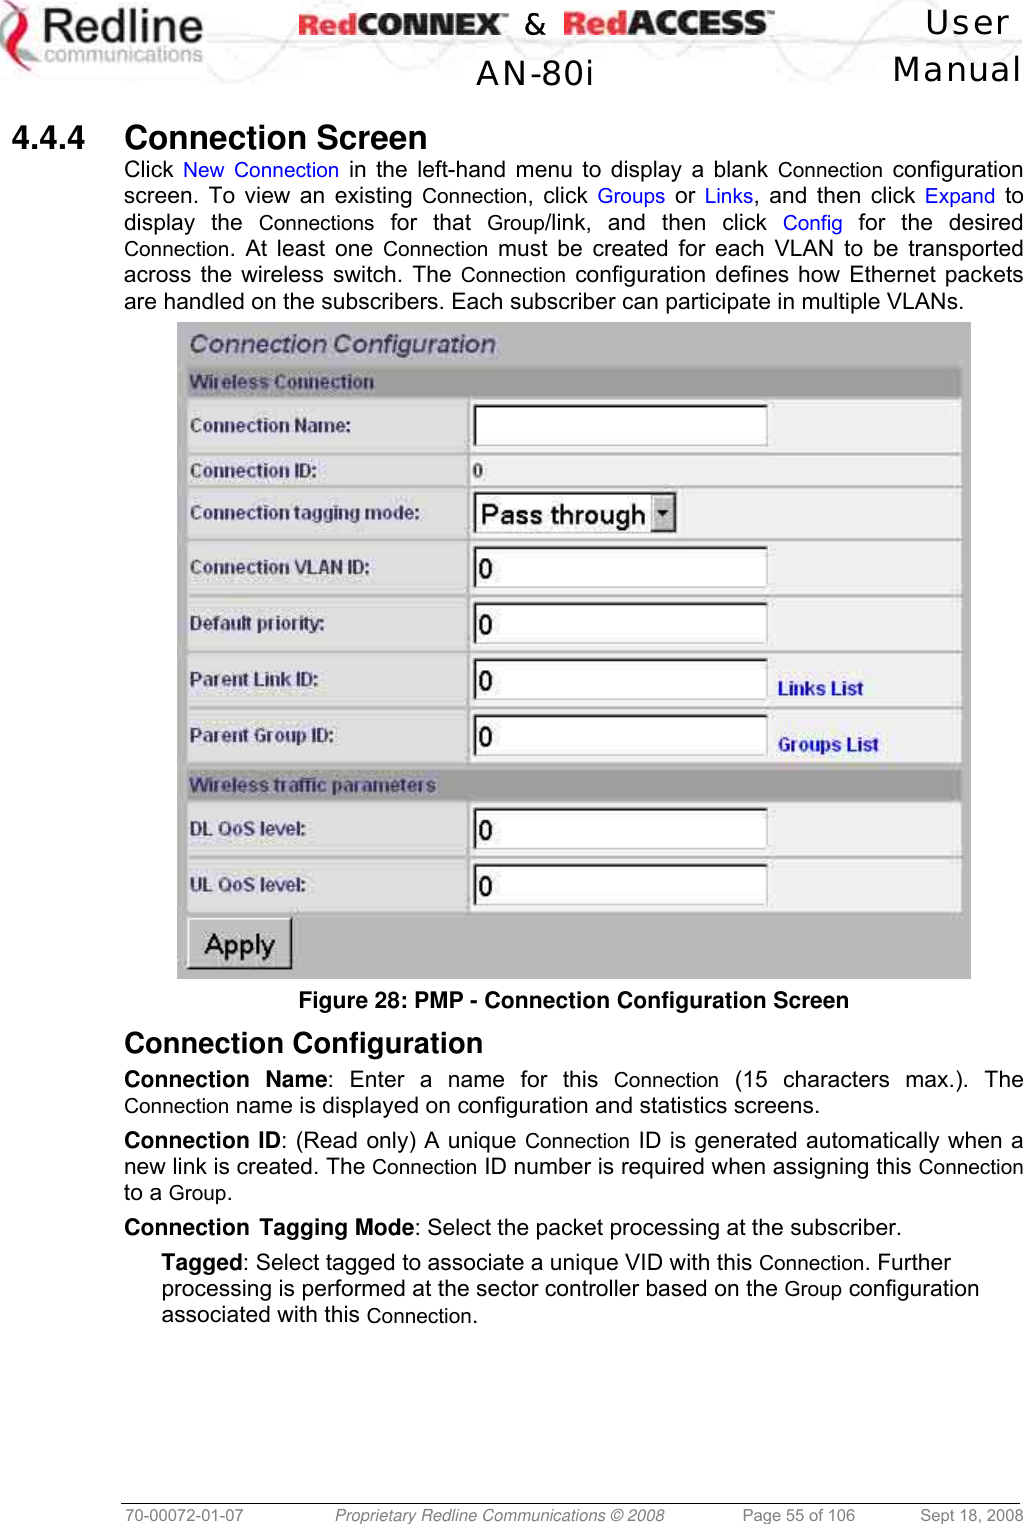    &amp;  User  AN-80i Manual  70-00072-01-07  Proprietary Redline Communications © 2008  Page 55 of 106  Sept 18, 2008  4.4.4 Connection Screen Click  New Connection in the left-hand menu to display a blank Connection configuration screen. To view an existing Connection, click Groups or Links, and then click Expand to display the Connections for that Group/link, and then click Config for the desired Connection. At least one Connection must be created for each VLAN to be transported across the wireless switch. The Connection configuration defines how Ethernet packets are handled on the subscribers. Each subscriber can participate in multiple VLANs.  Figure 28: PMP - Connection Configuration Screen  Connection Configuration Connection Name: Enter a name for this Connection (15 characters max.). The Connection name is displayed on configuration and statistics screens. Connection ID: (Read only) A unique Connection ID is generated automatically when a new link is created. The Connection ID number is required when assigning this Connection to a Group. Connection Tagging Mode: Select the packet processing at the subscriber. Tagged: Select tagged to associate a unique VID with this Connection. Further processing is performed at the sector controller based on the Group configuration associated with this Connection. 